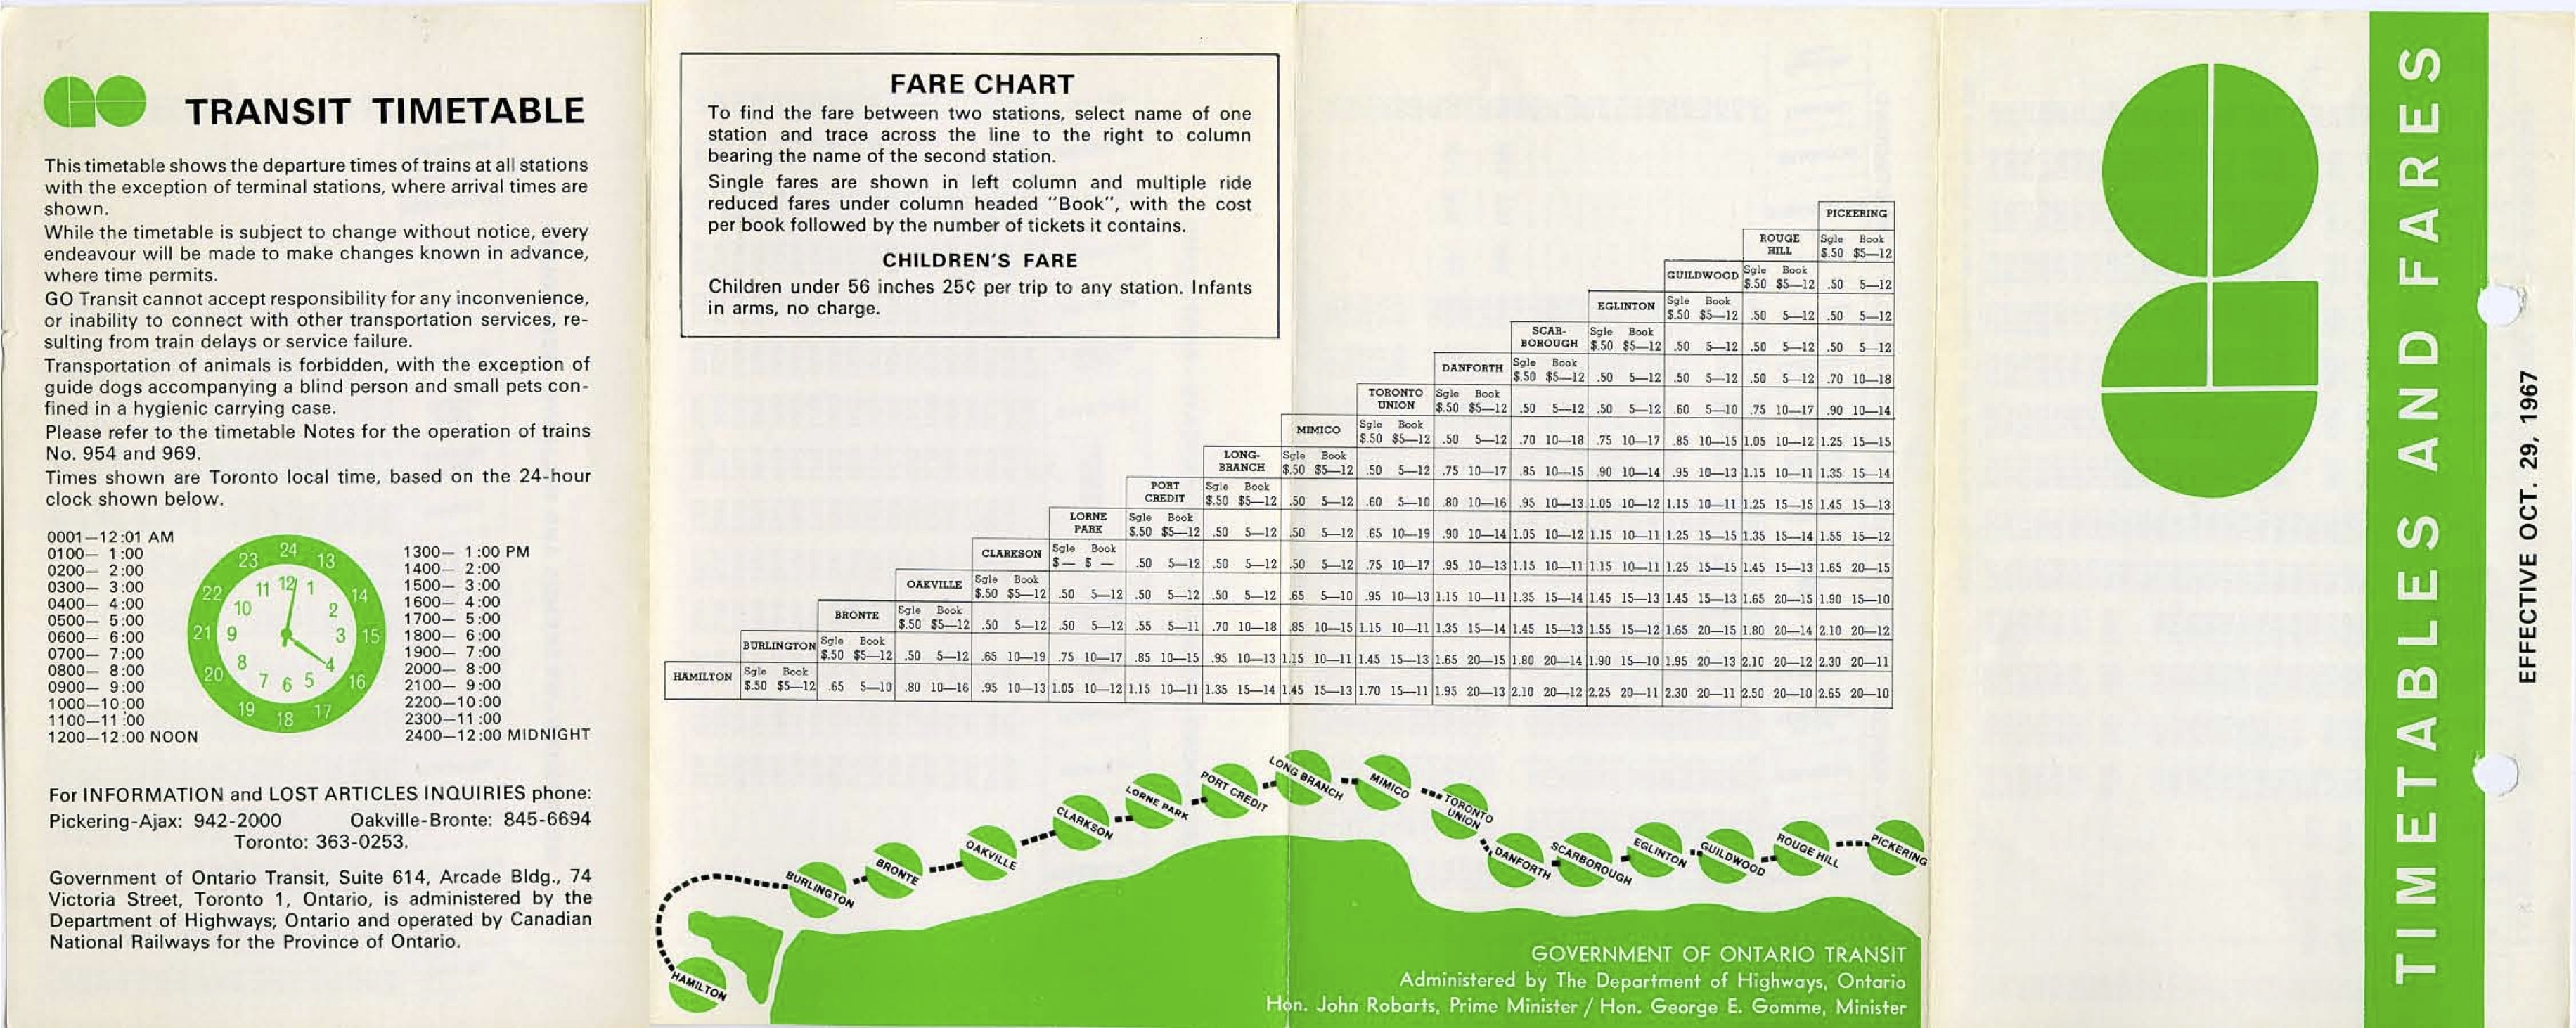 GO transit timetable 1960s page 7